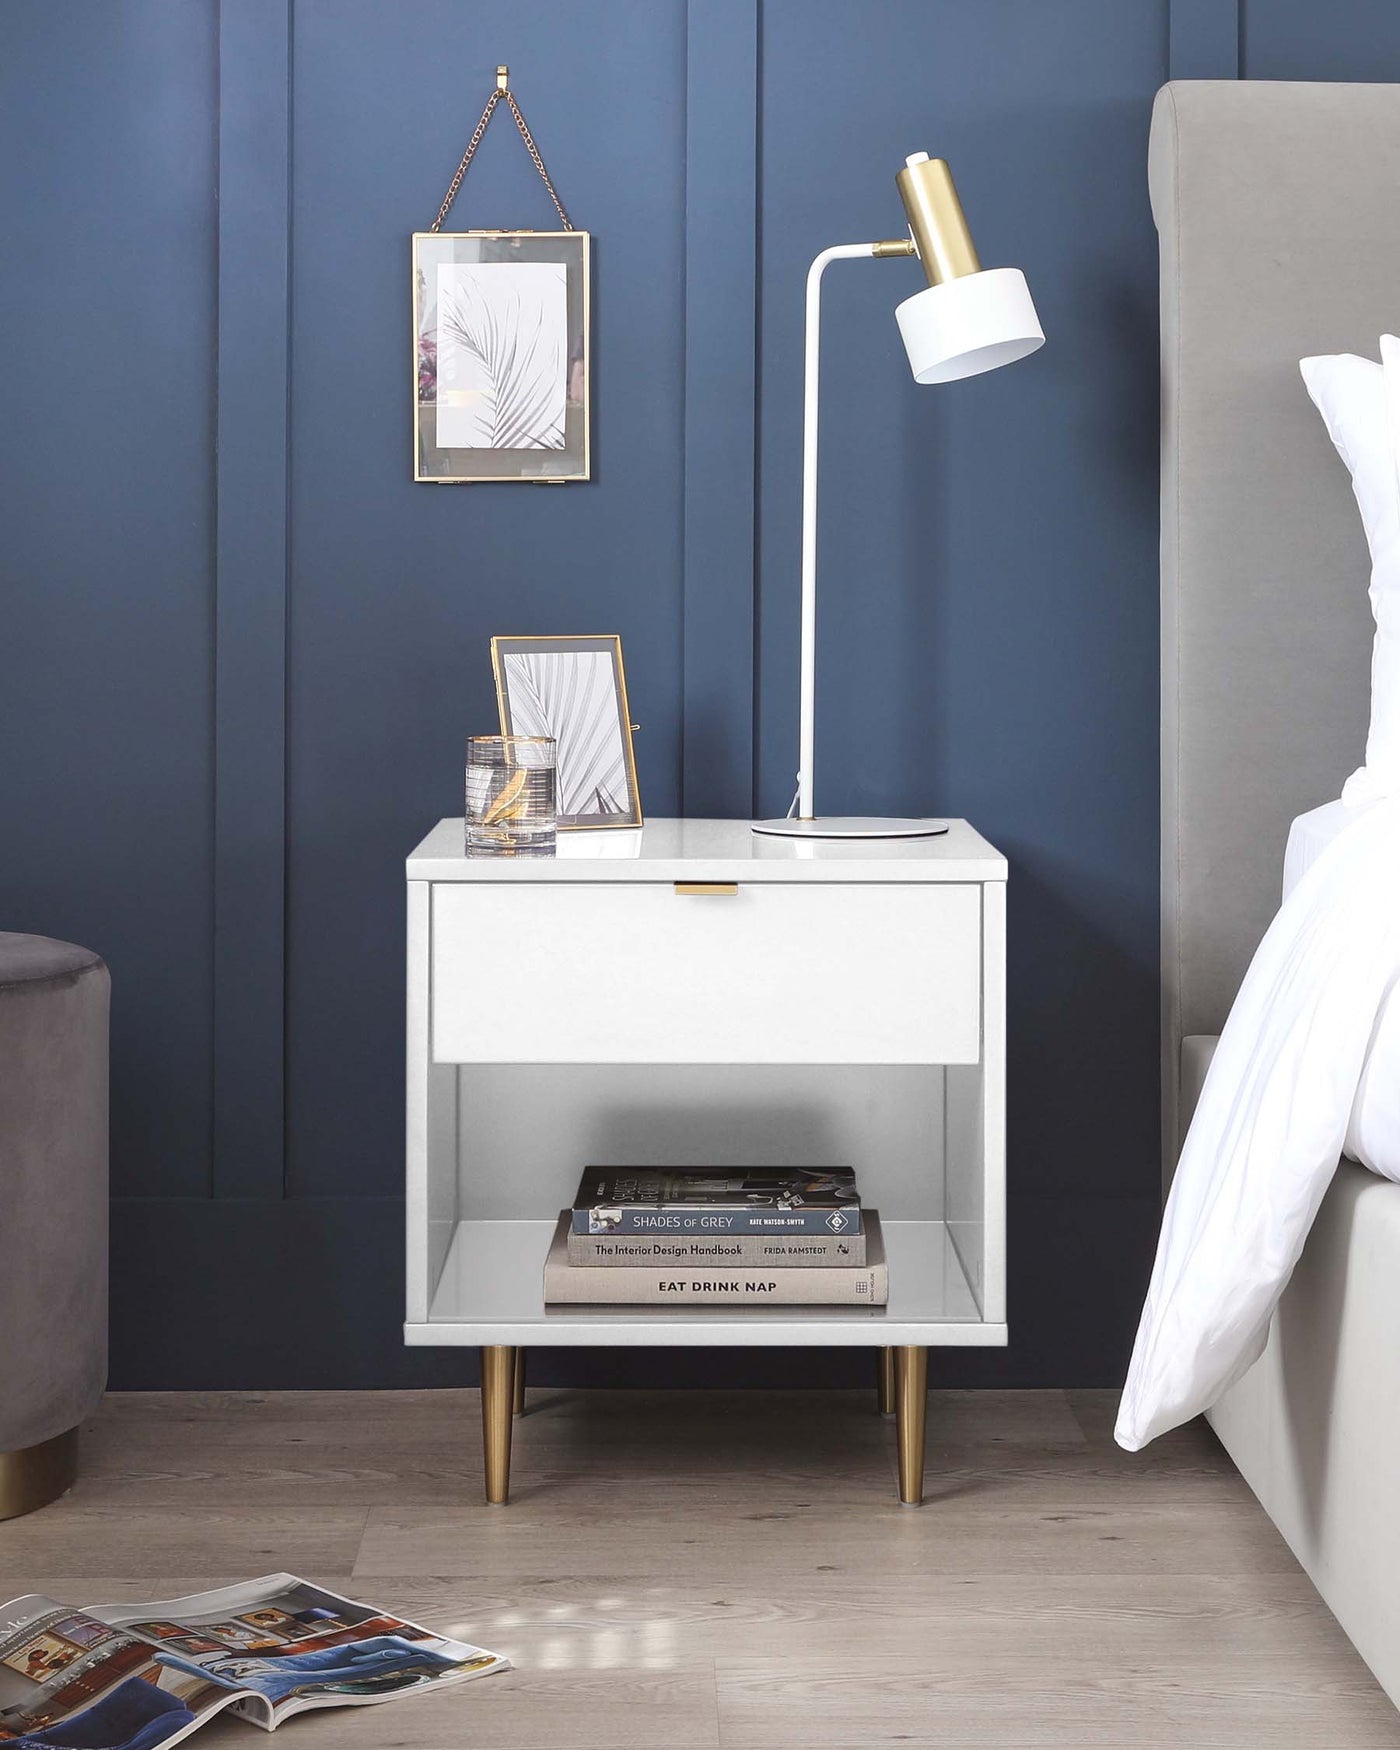 Modern white bedside table with a single drawer, gold handles, and gold-tipped legs, featuring an open lower shelf with stacked books. The table is accessorized with a white and gold desk lamp, framed pictures, and a decorative item, set against a blue wall with a hung framed artwork.